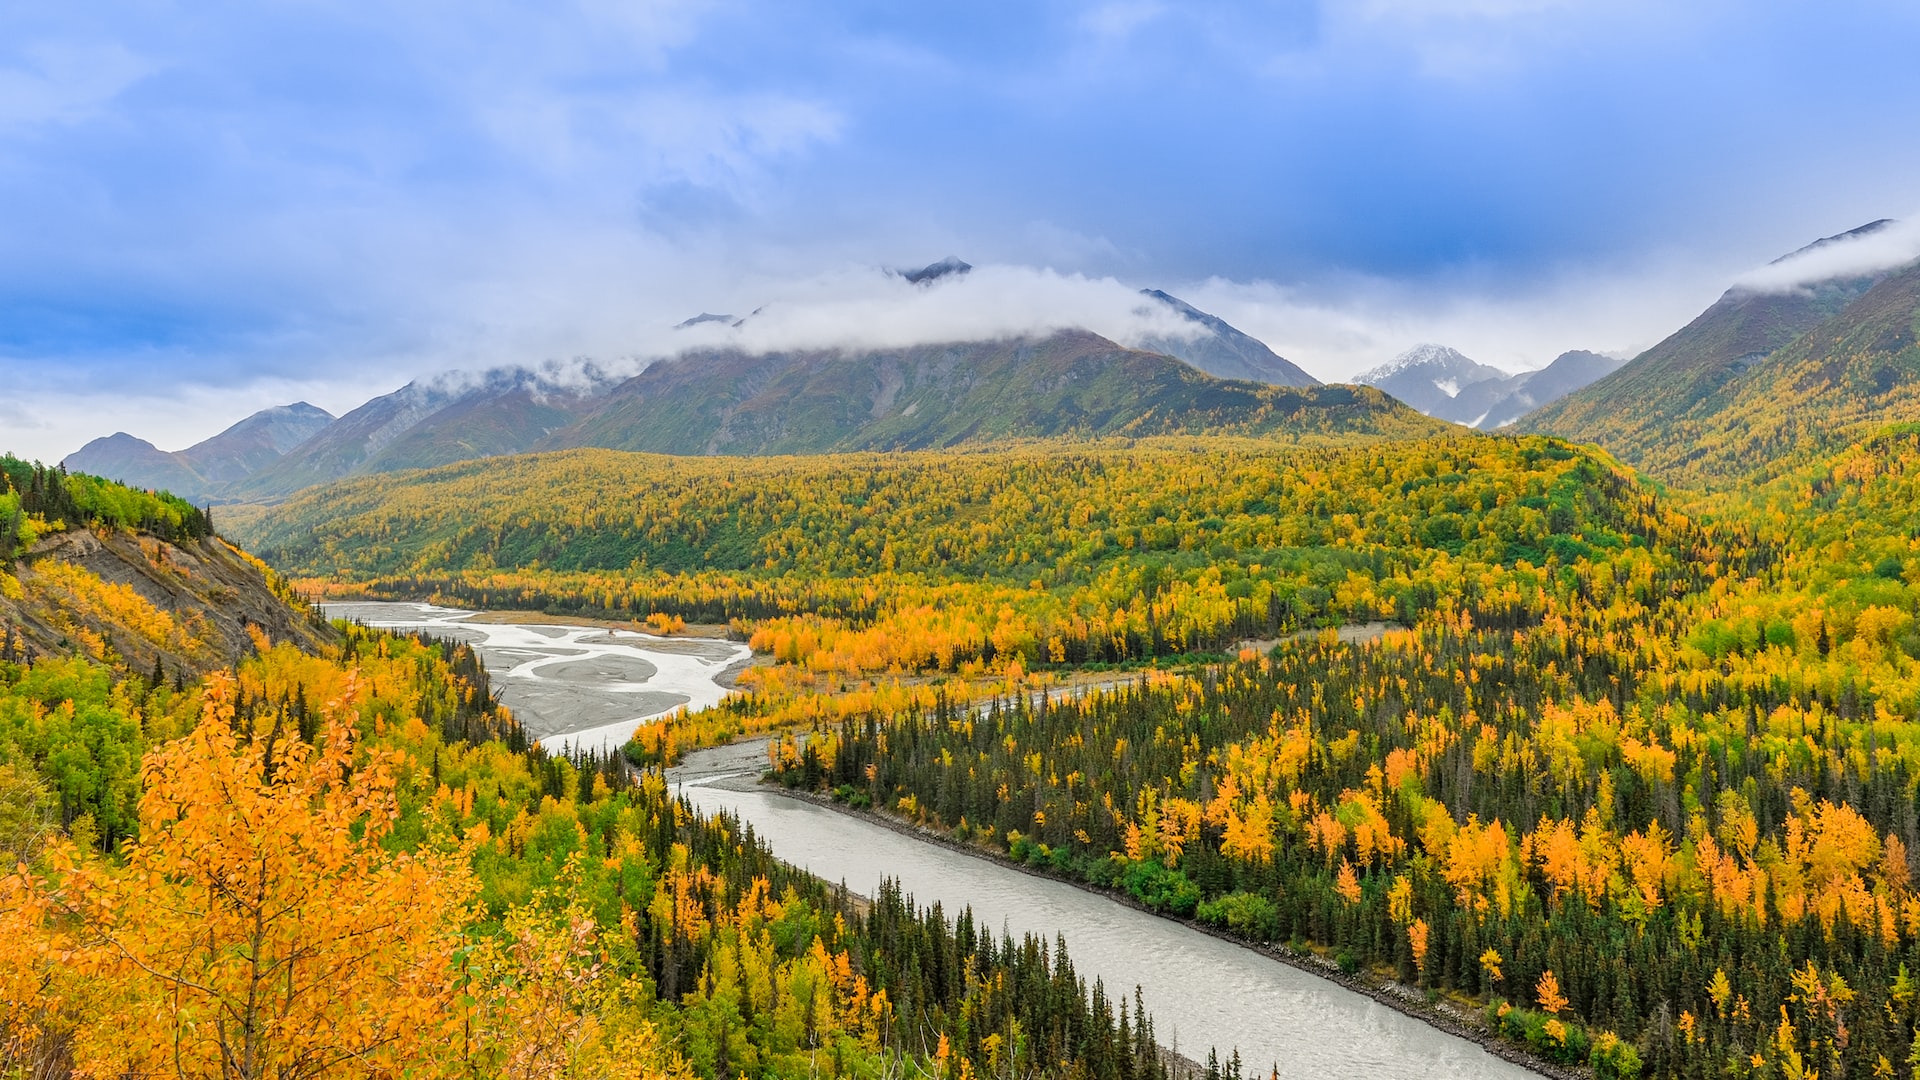 Anchorage, Alaska's wilderness during fall with yellow leaves on the trees.